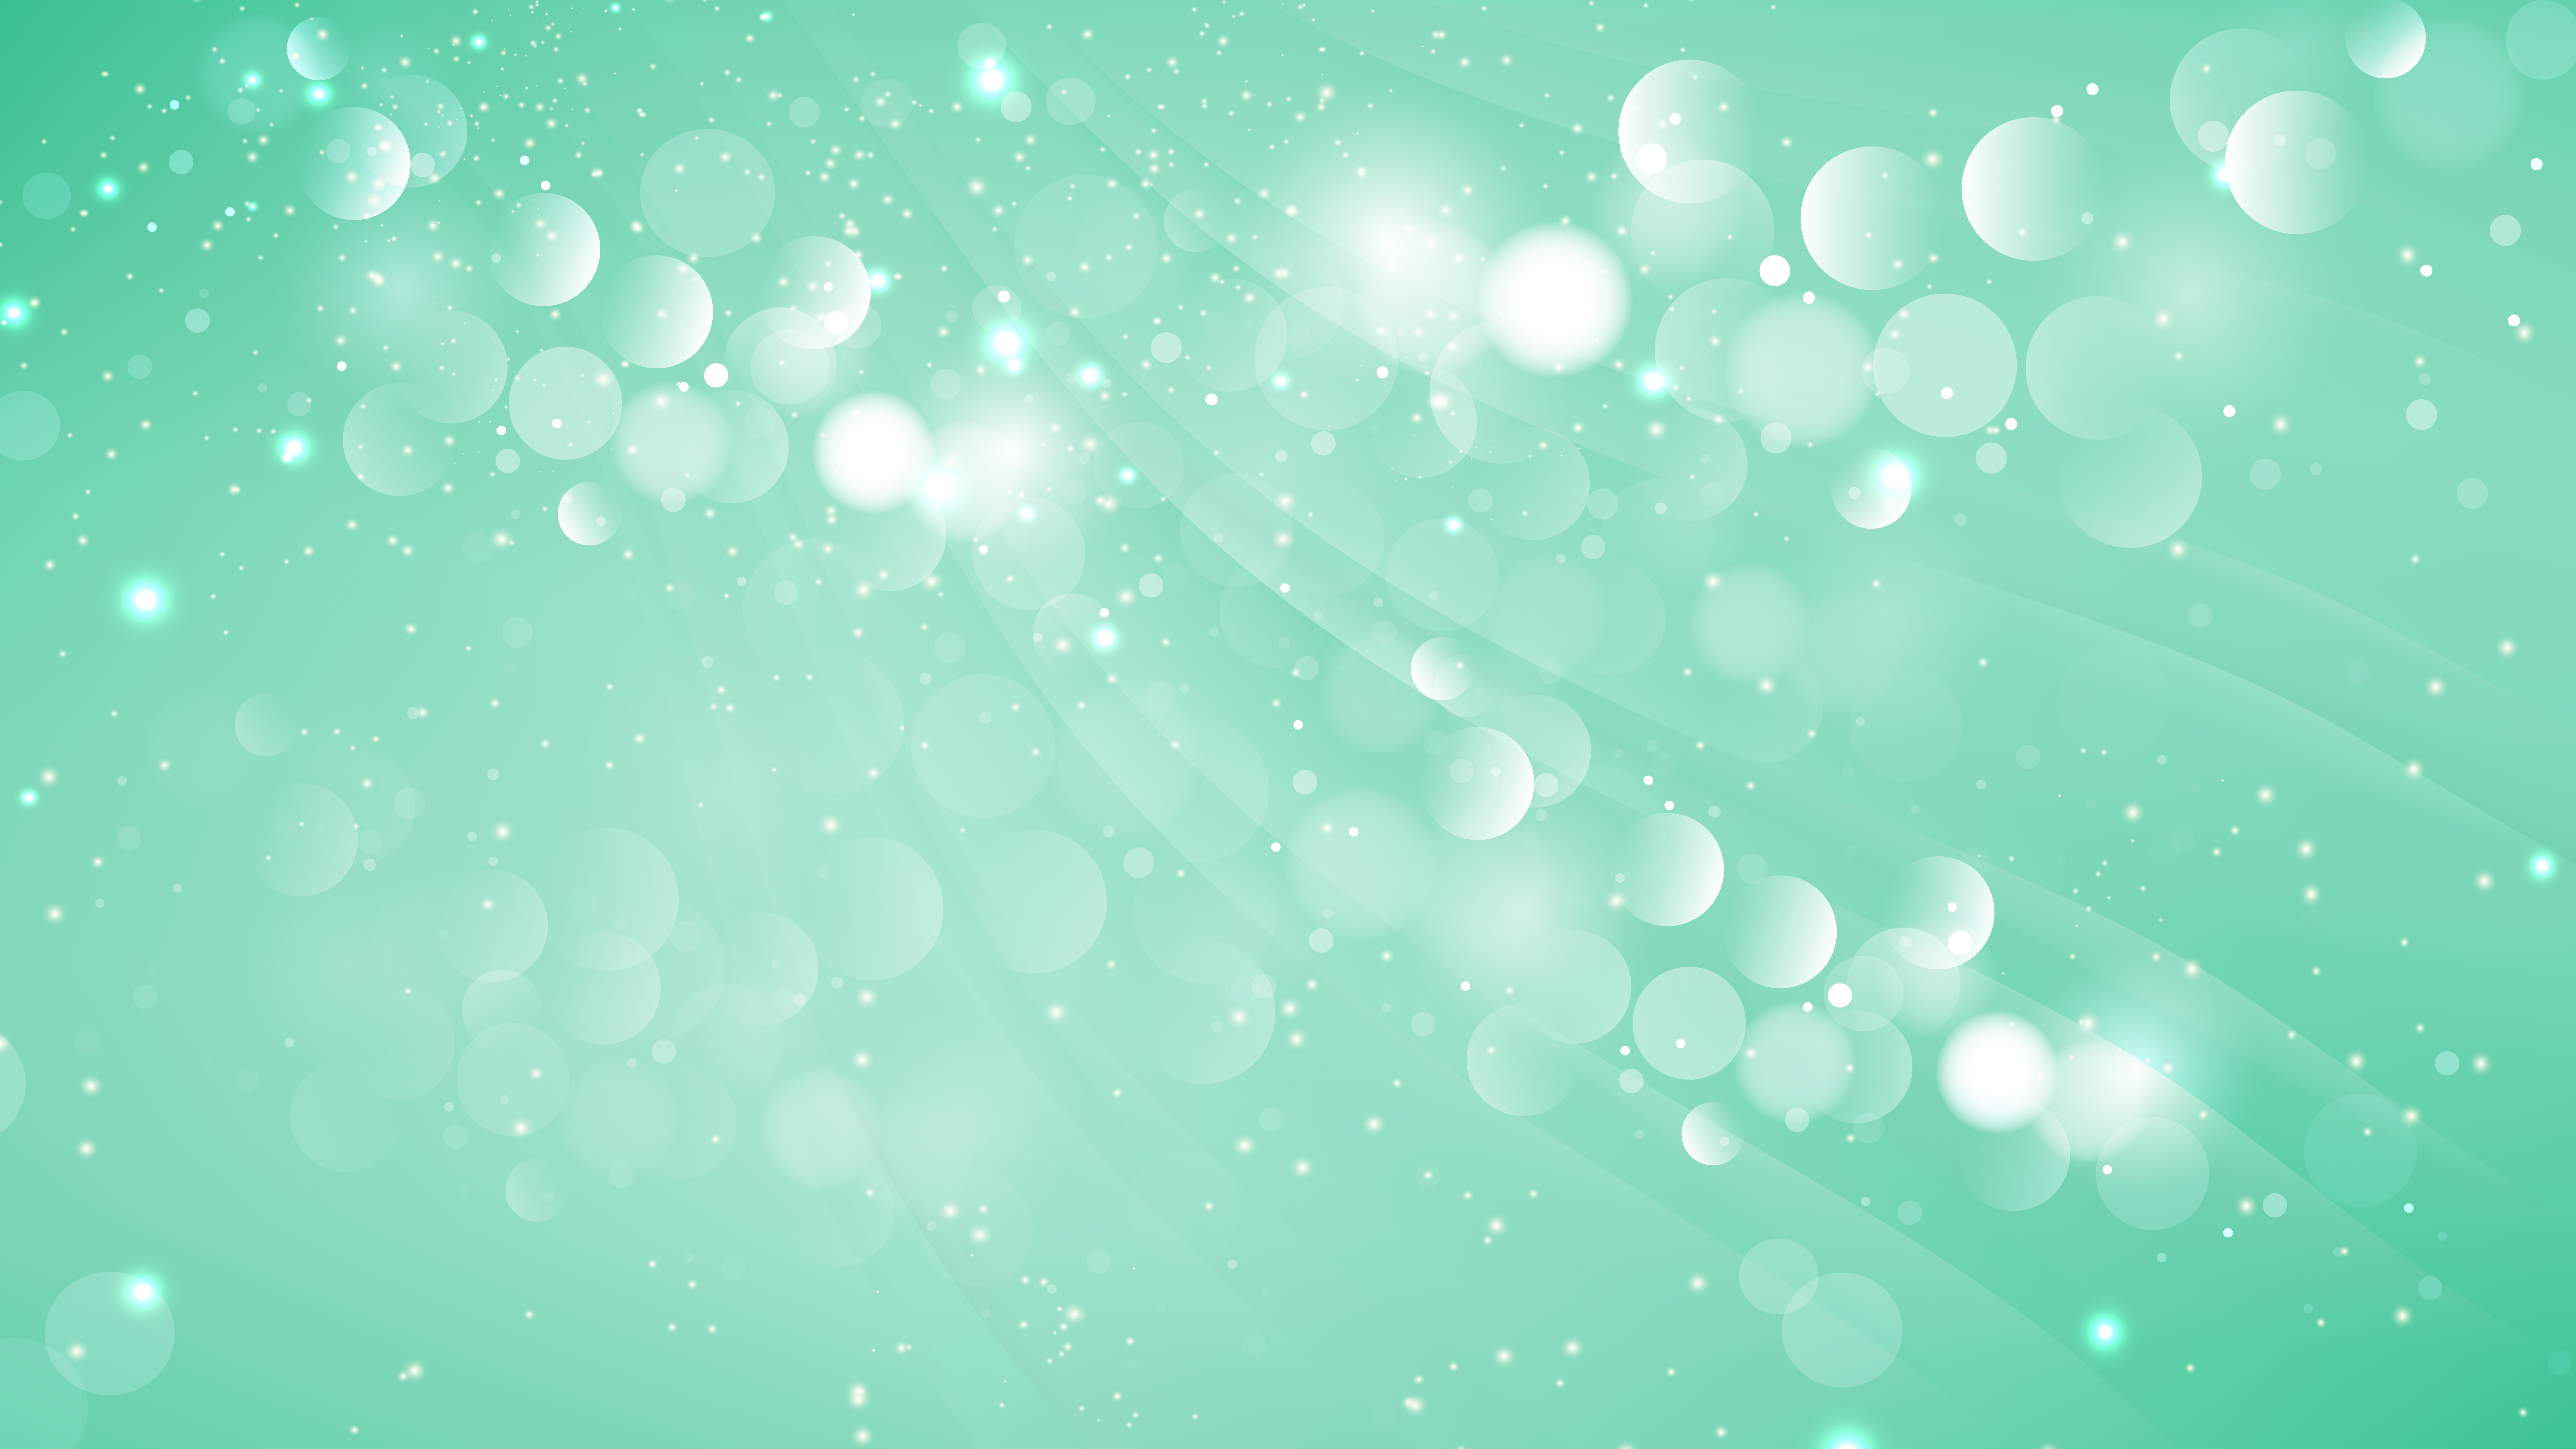 Abstract Mint Green Blurred Bokeh Background Vector